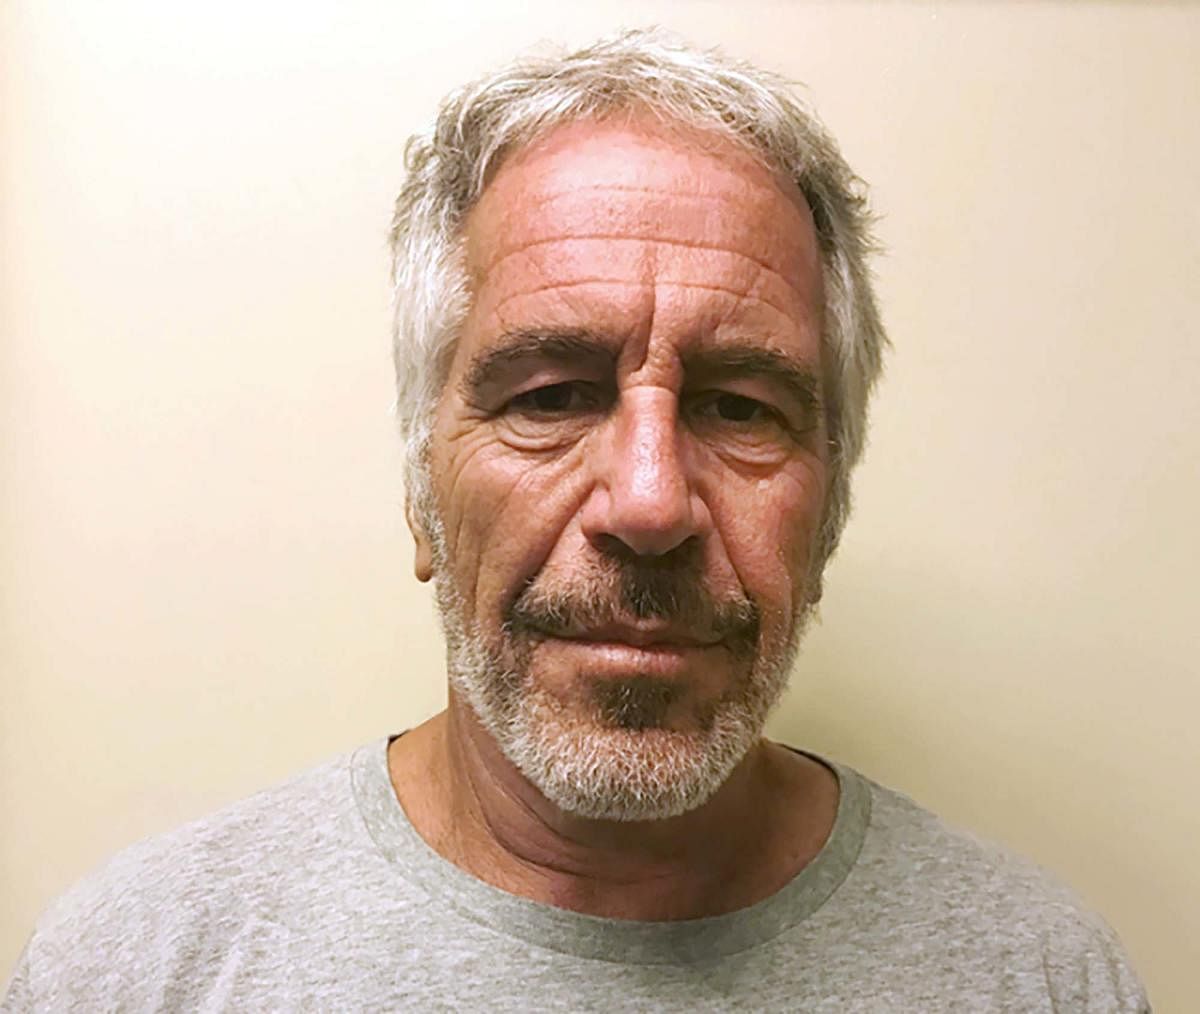 Epstein died in a New York jail in August while he was awaiting trial on sex trafficking charges. U.S. authorities ruled the death a suicide. File photo